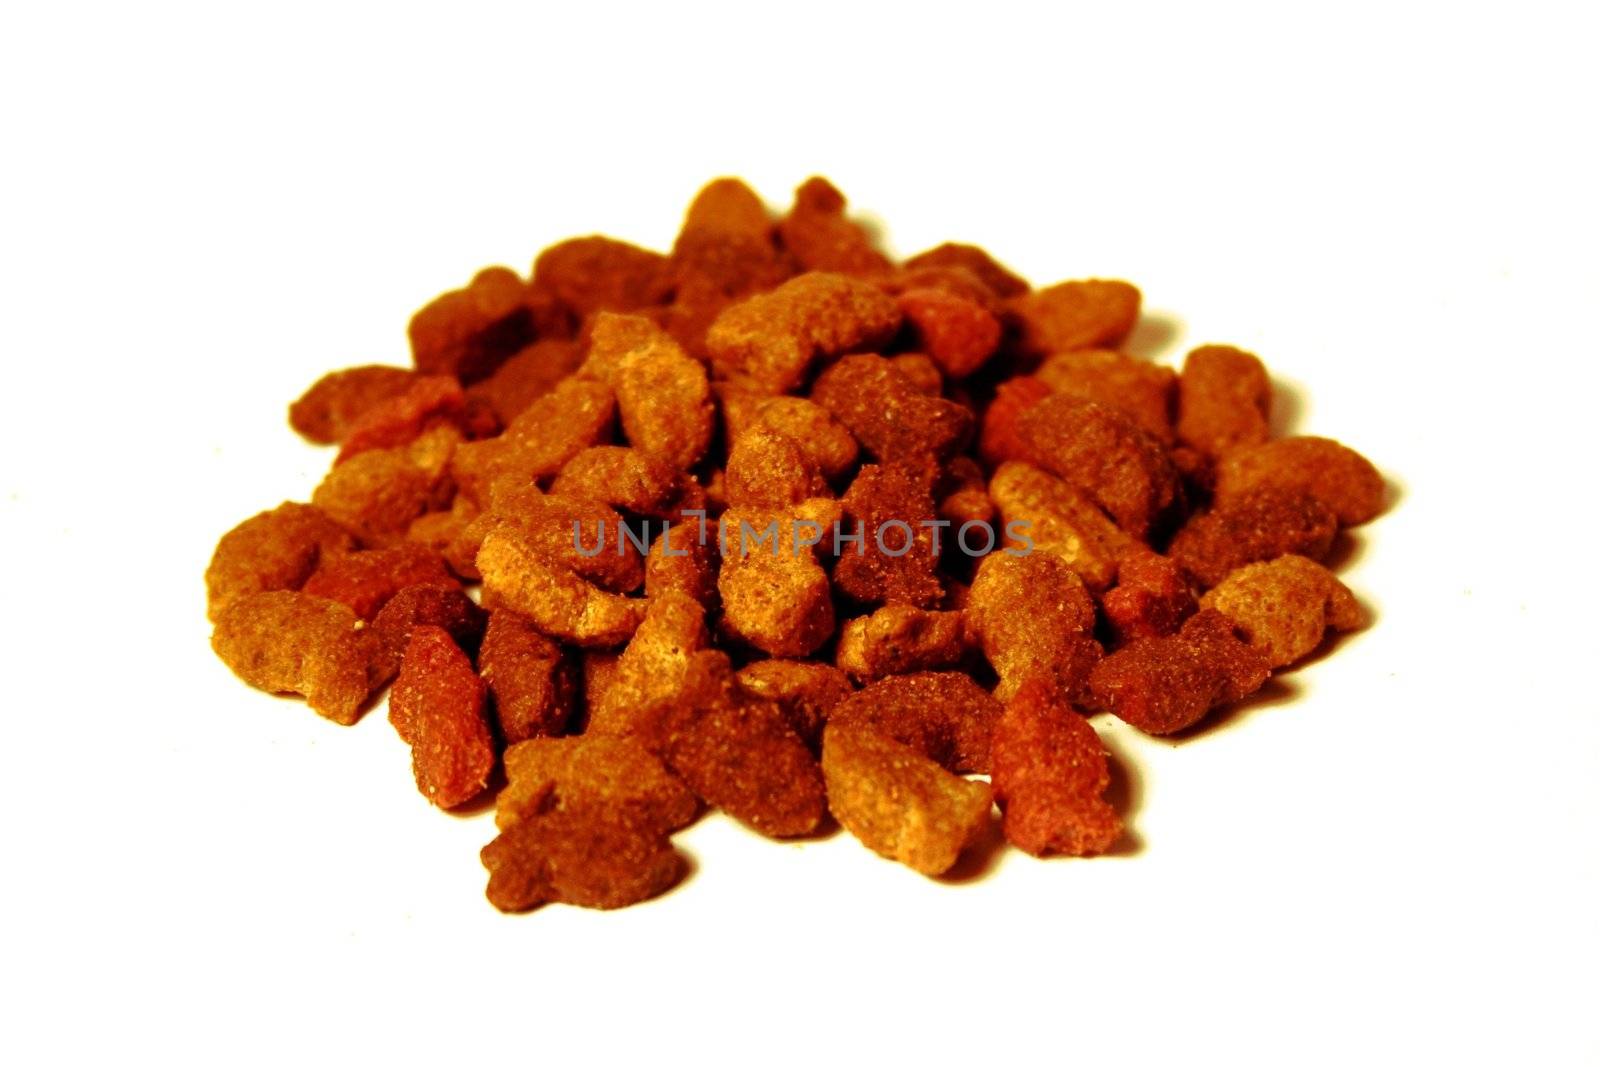 Grounded cat food on white background